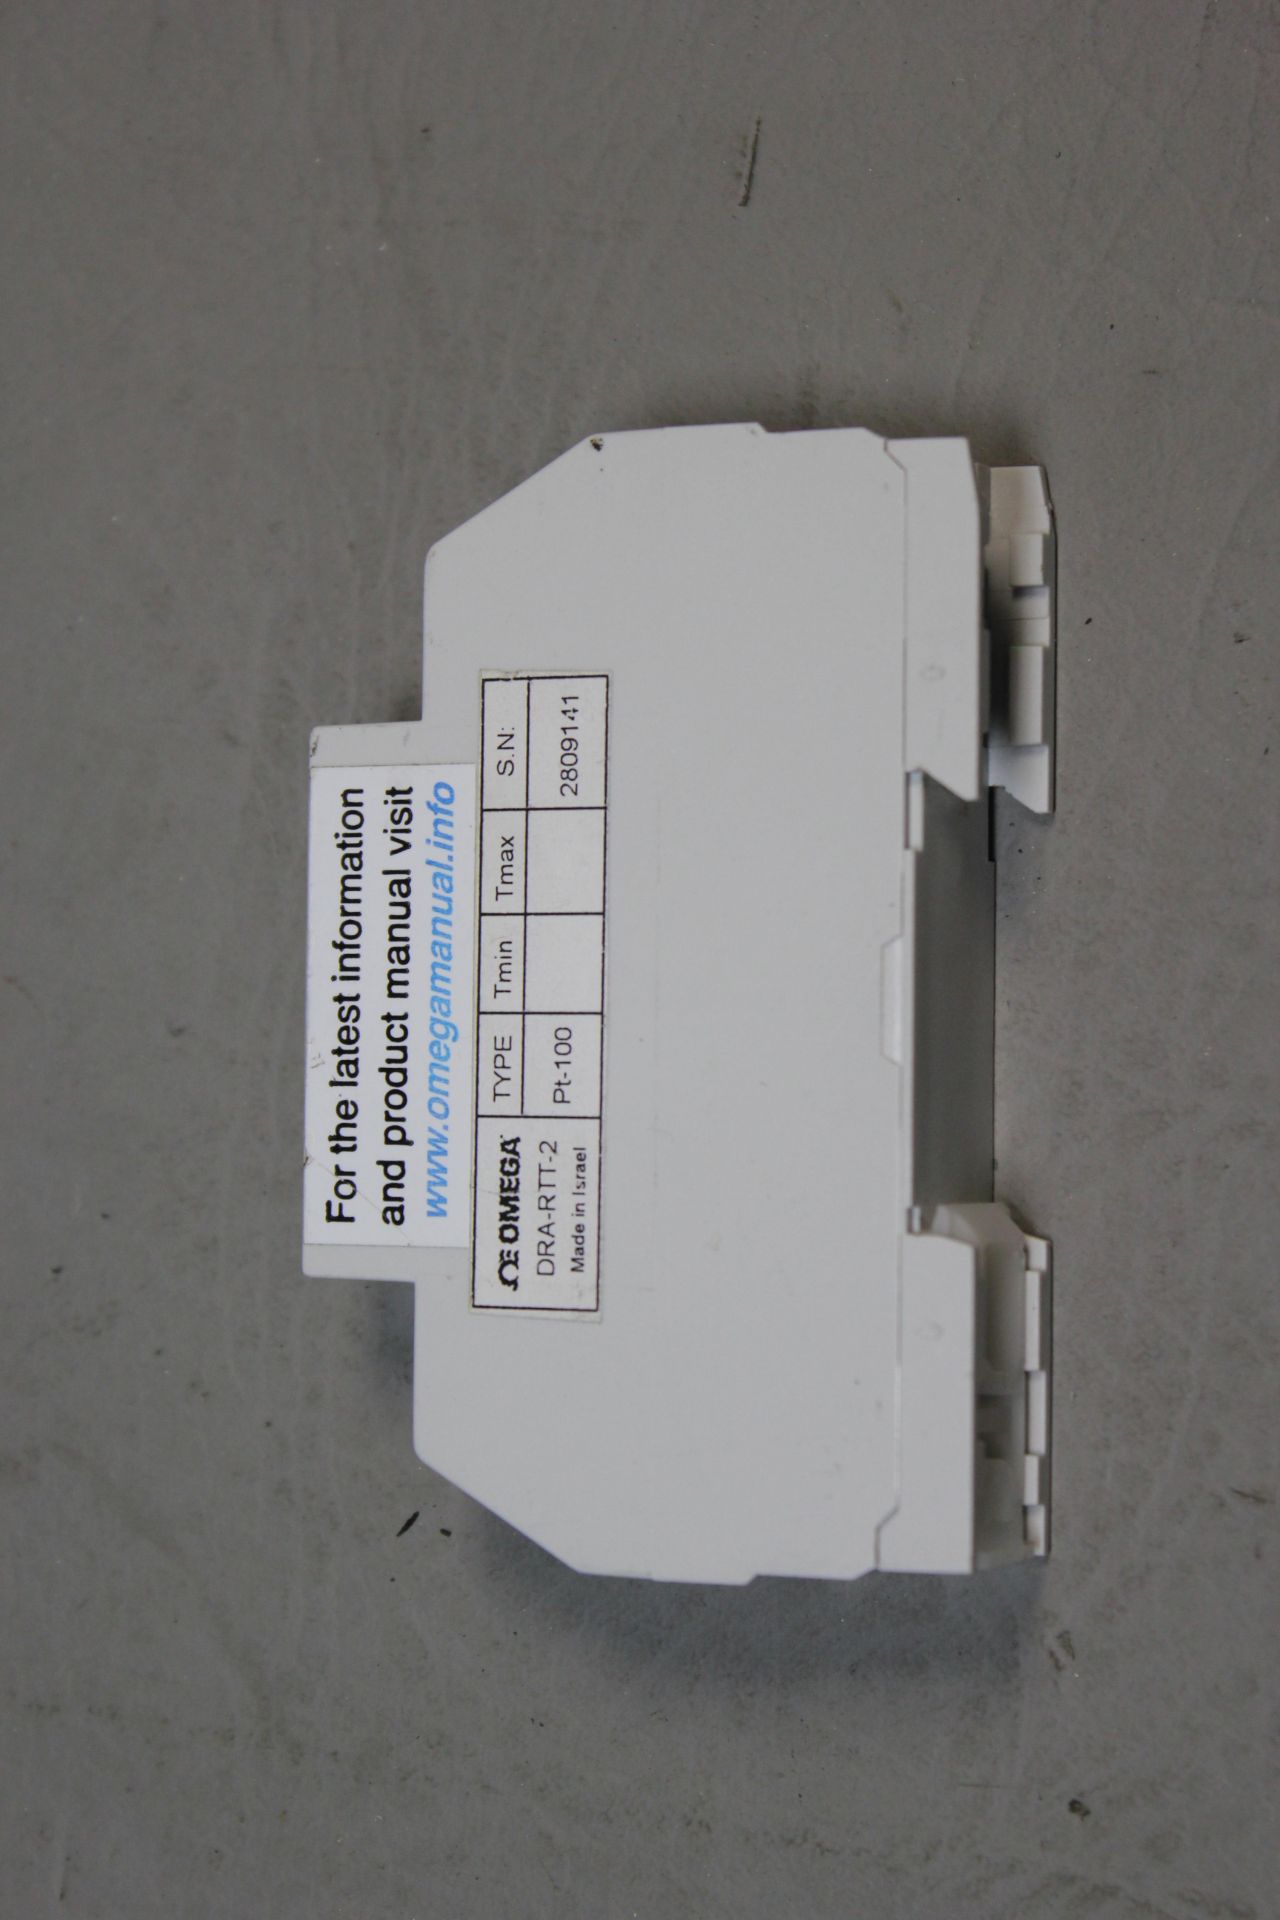 OMEGA SIGNAL CONDITIONER - Image 3 of 3